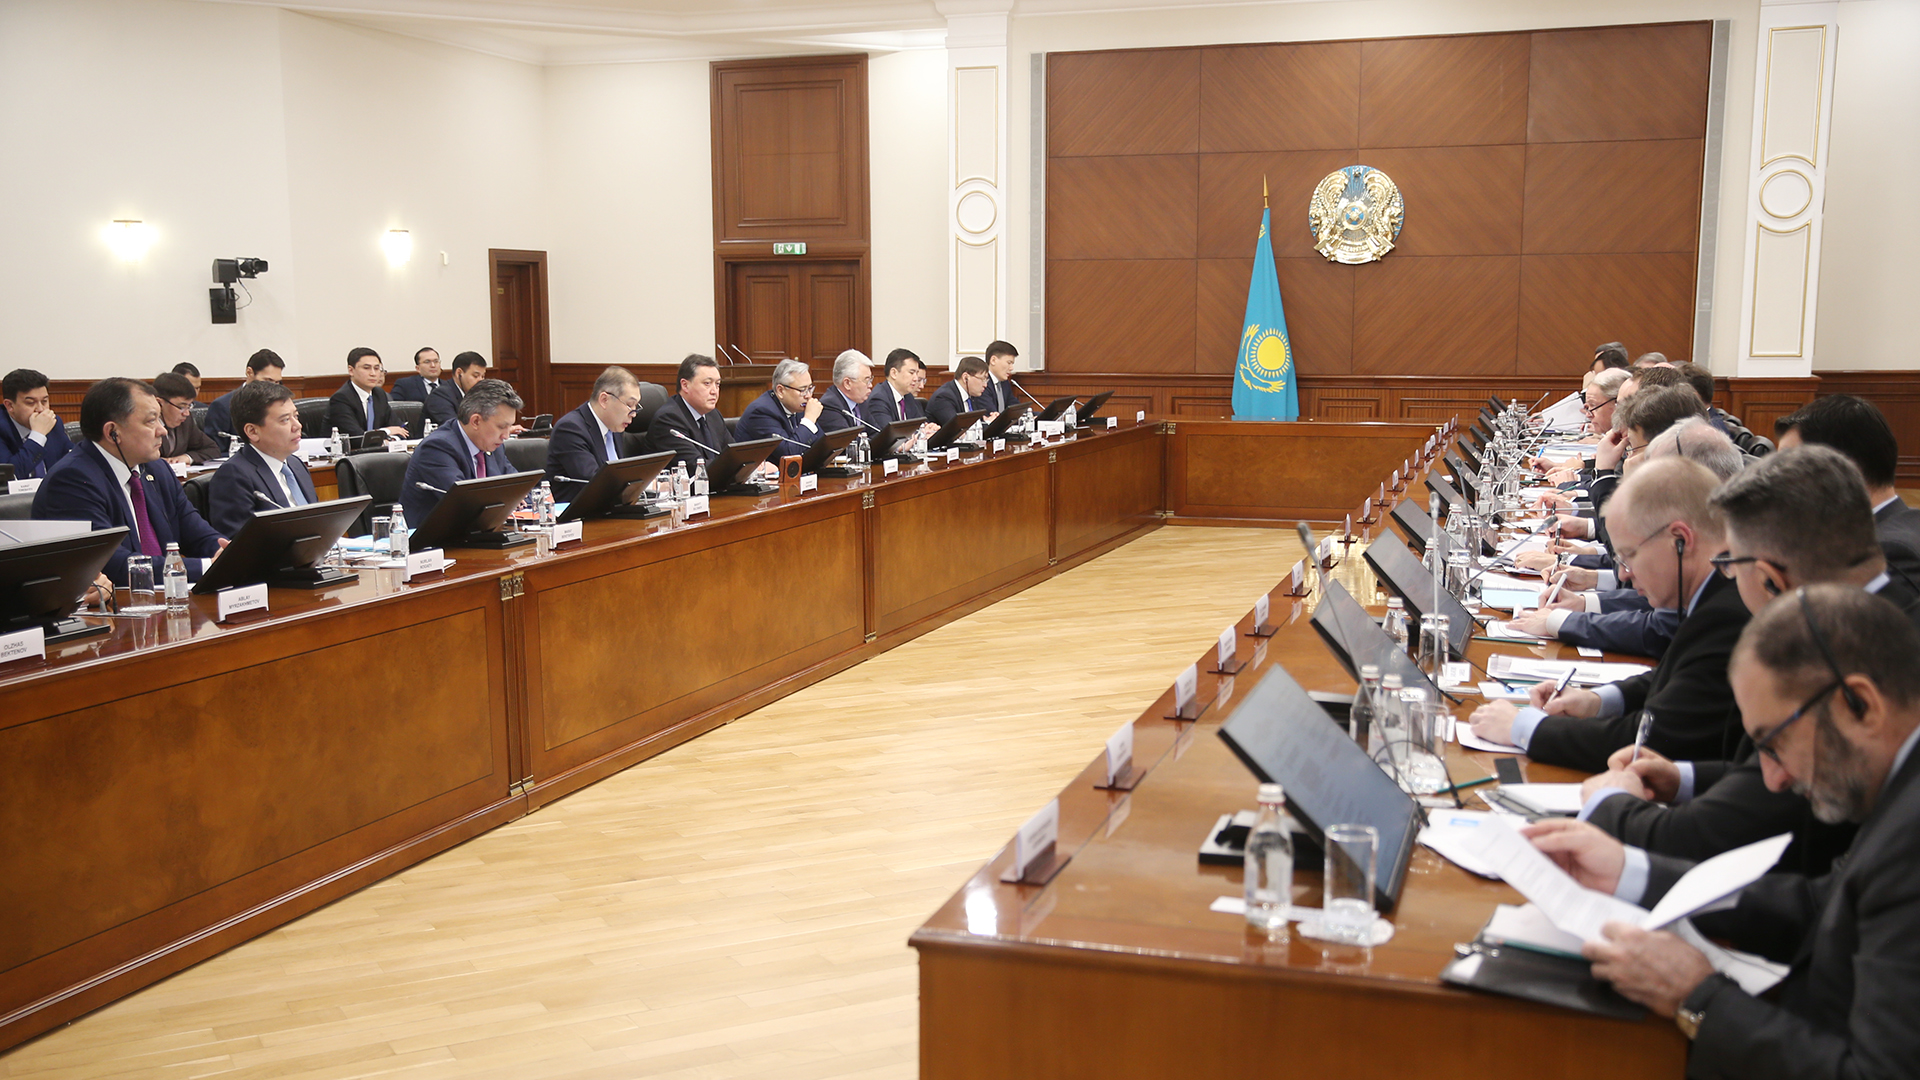 Investment cooperation between Kazakhstan and EU discussed